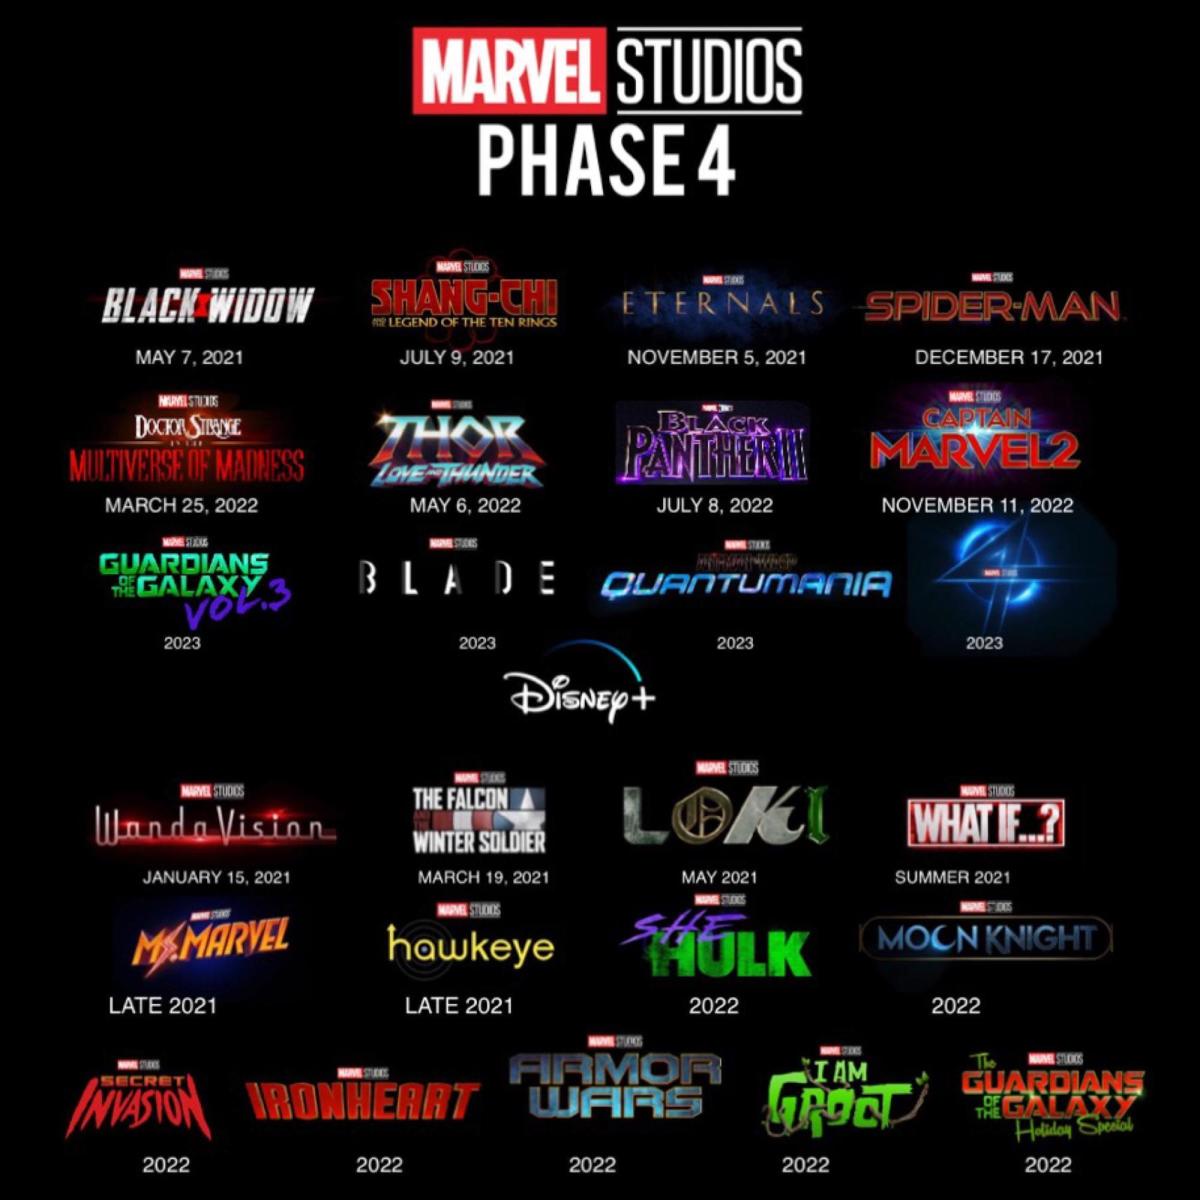 The timeline for Phase 4 and suspected movies and TV shows to be released.